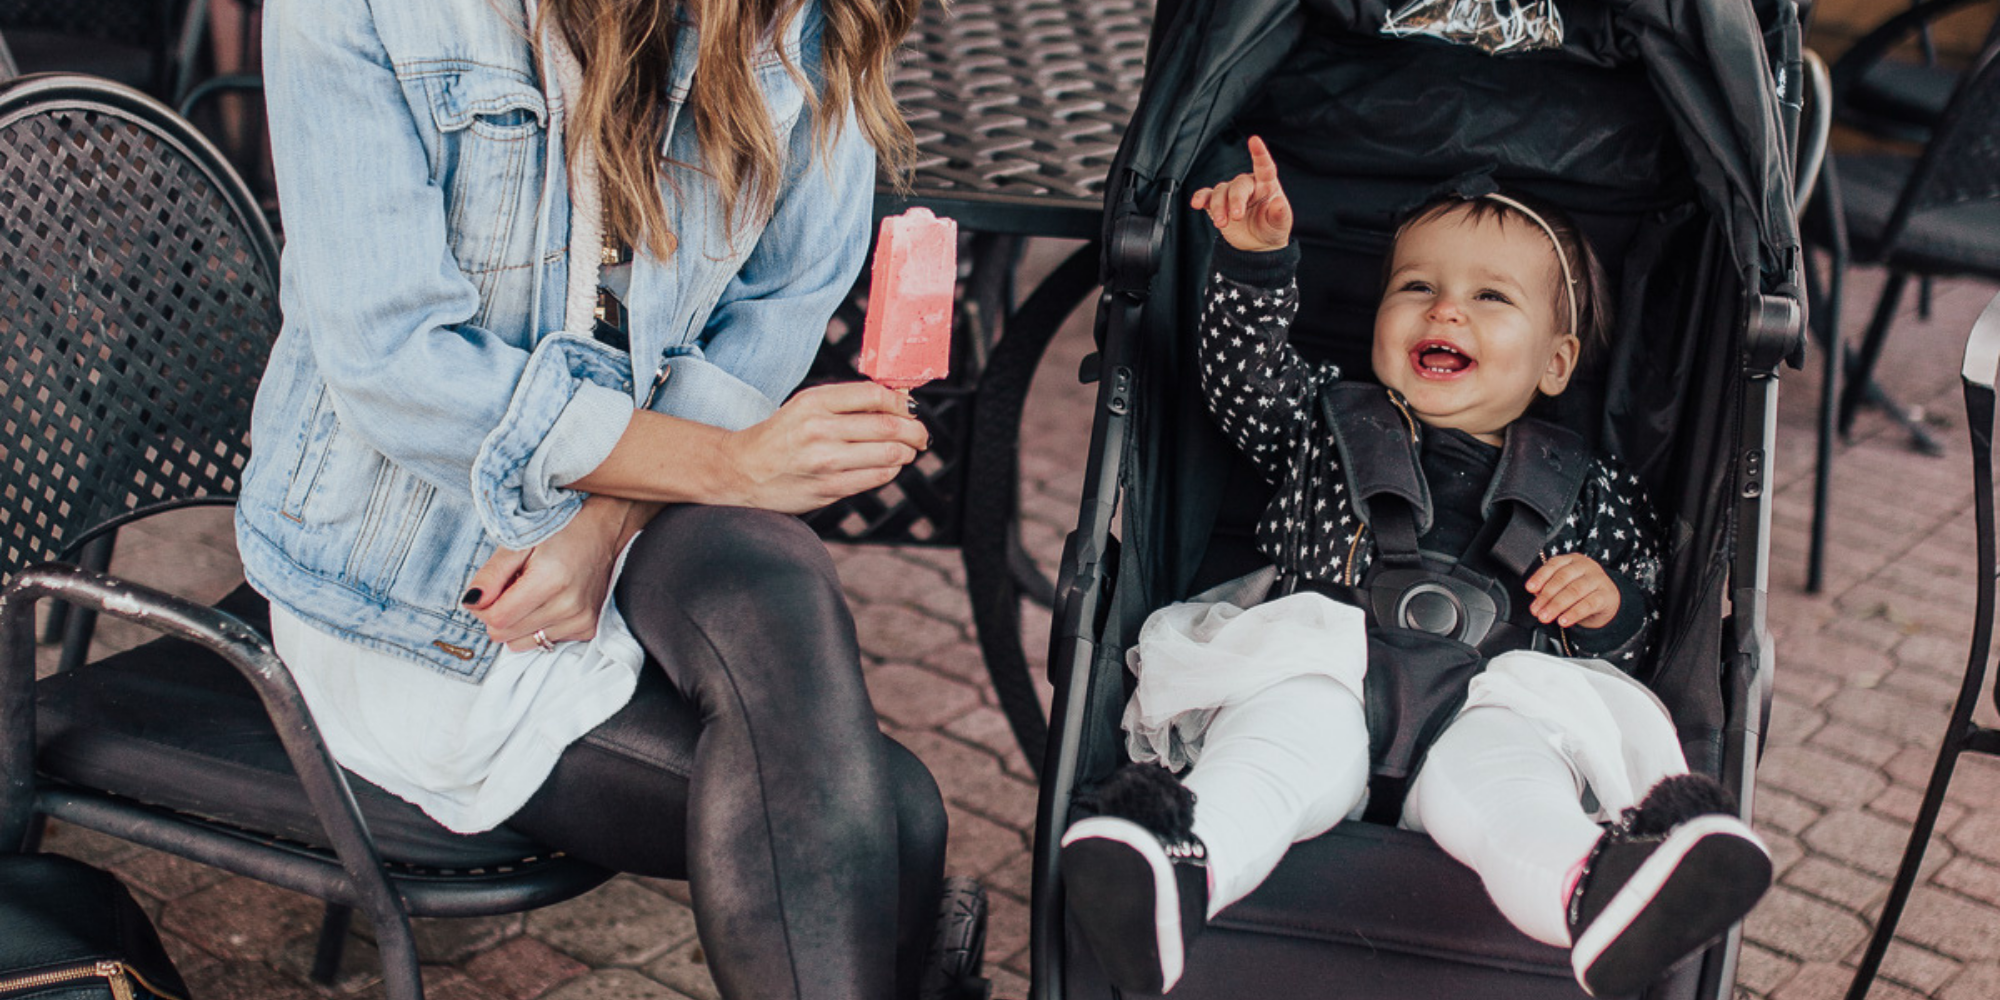 Baby smiling and pointing in a Baby Jogger Stroller